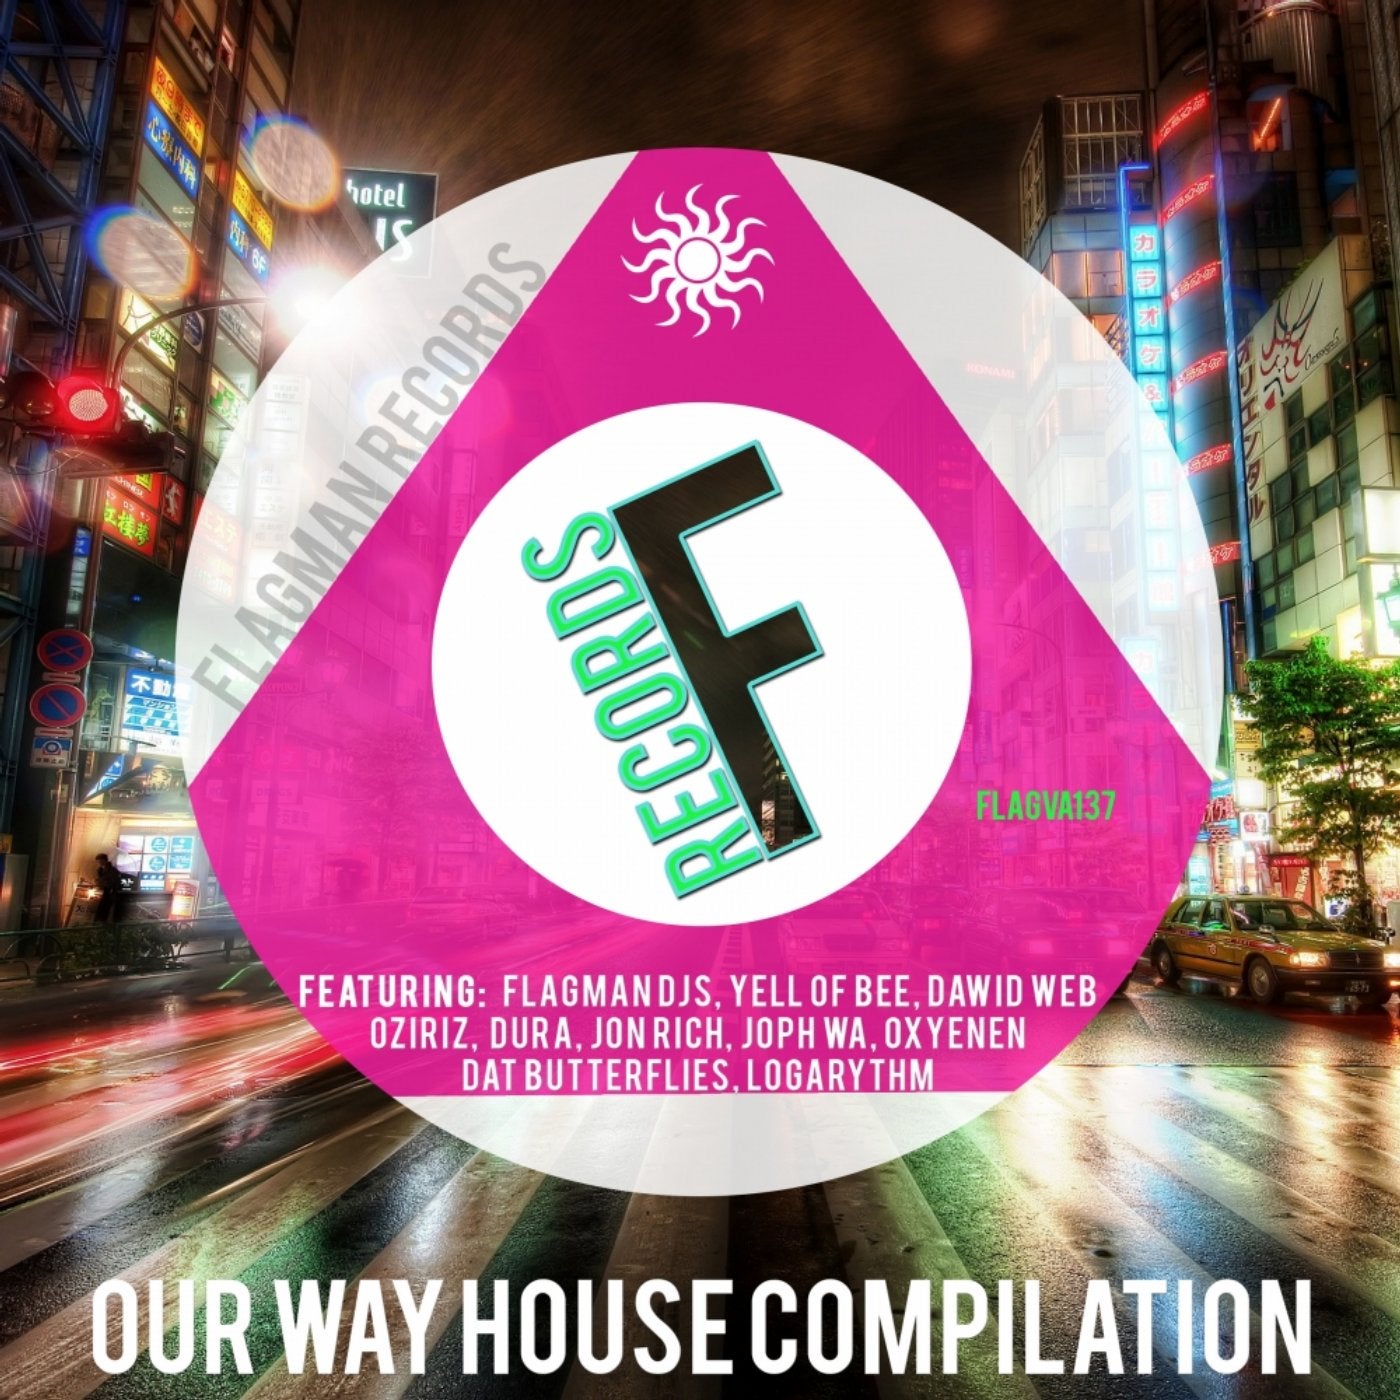 Our Way House Compilation